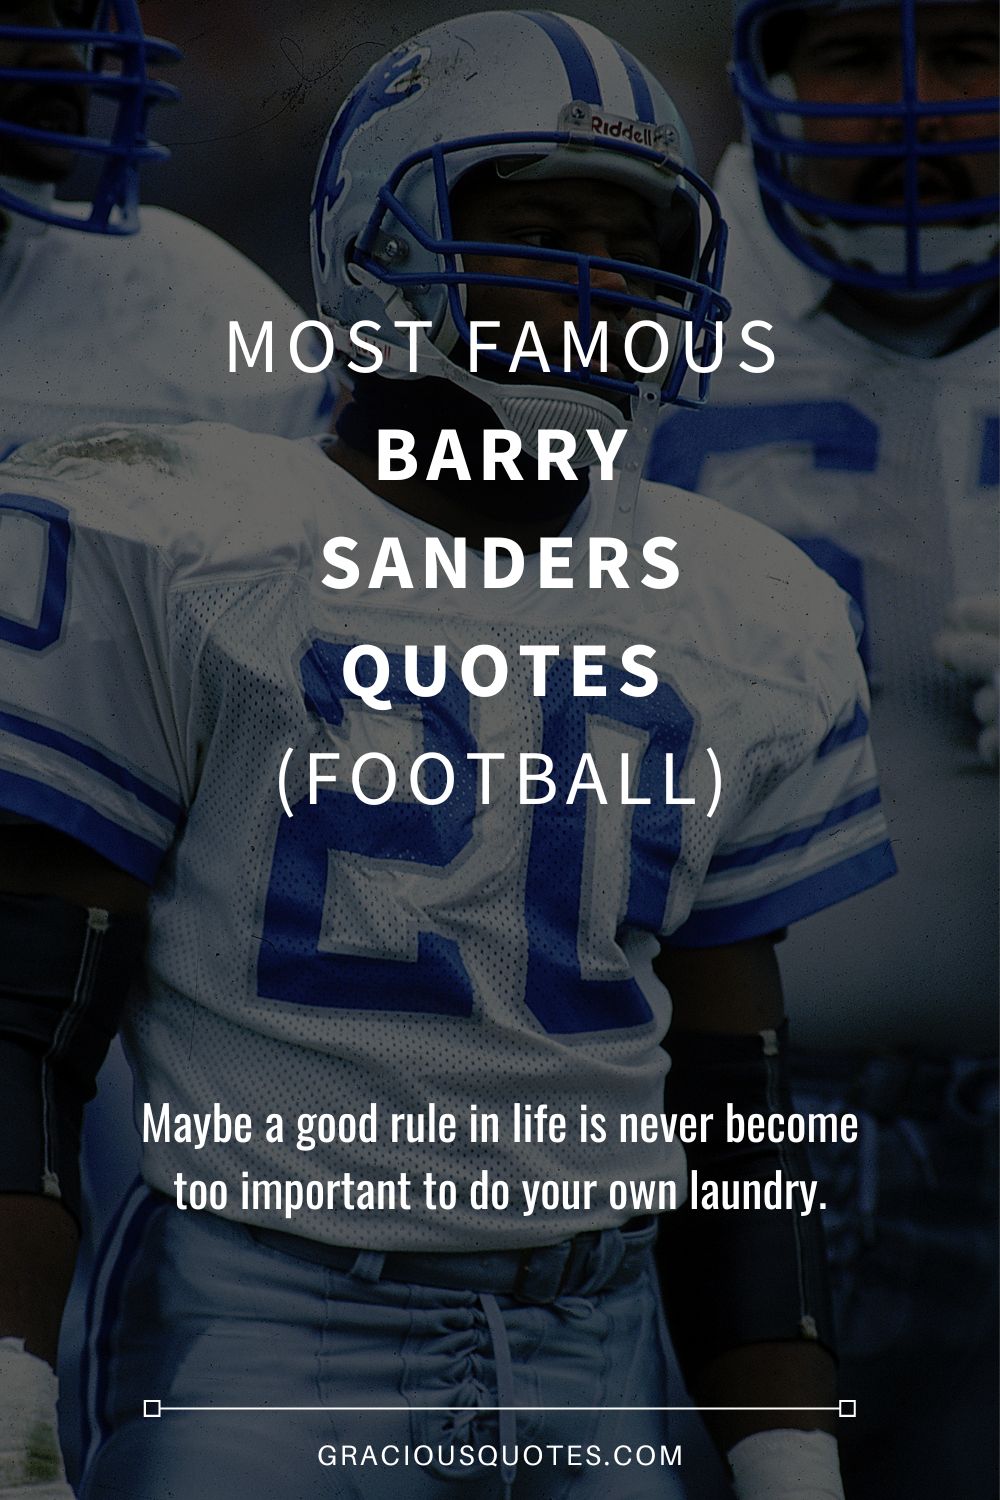 Barry Sanders Quote: “My desire to exit the game is greater than